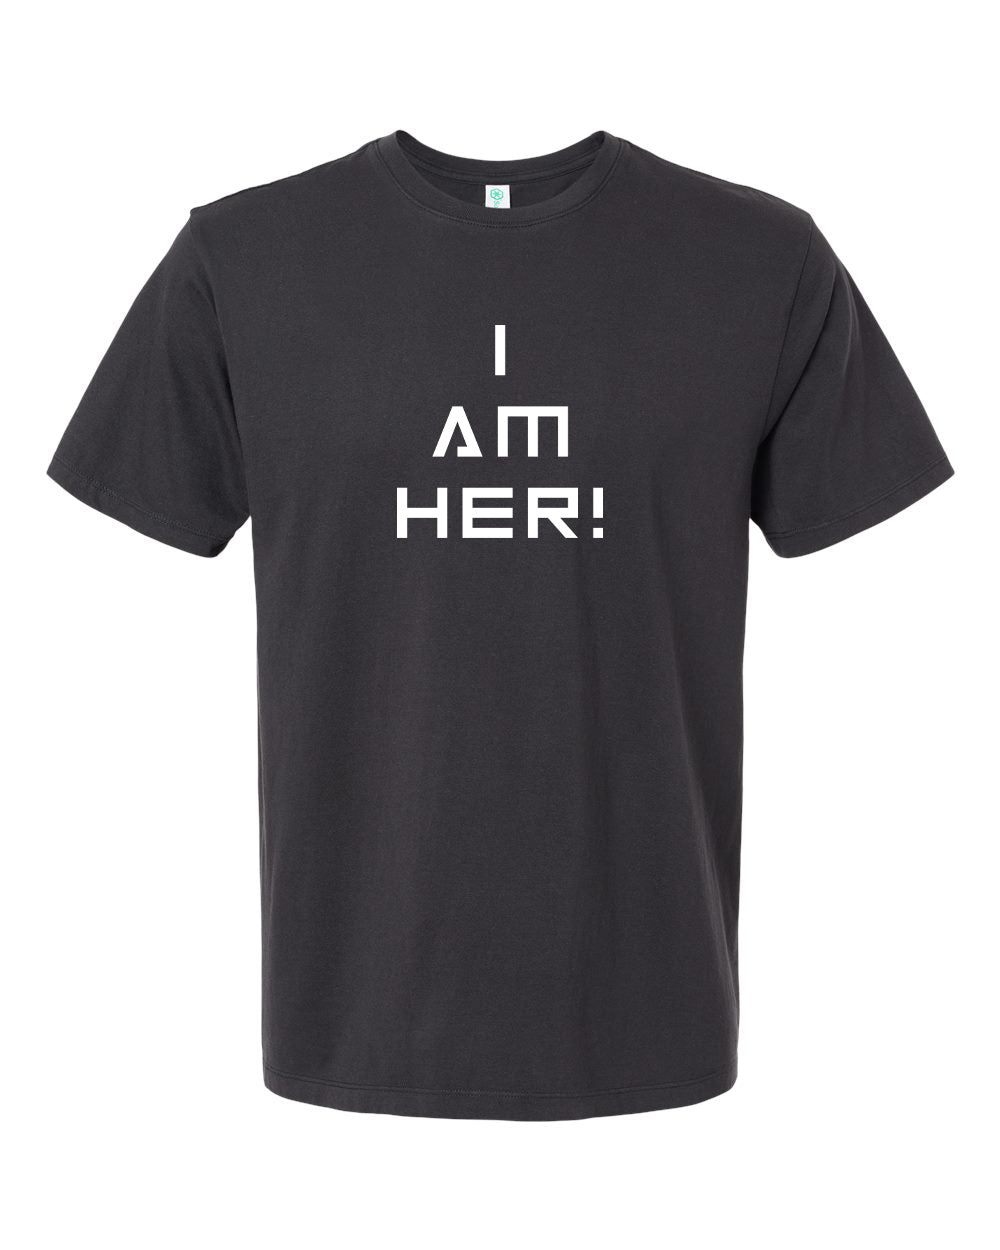 "I AM HER!" Youth Tee (color options available)